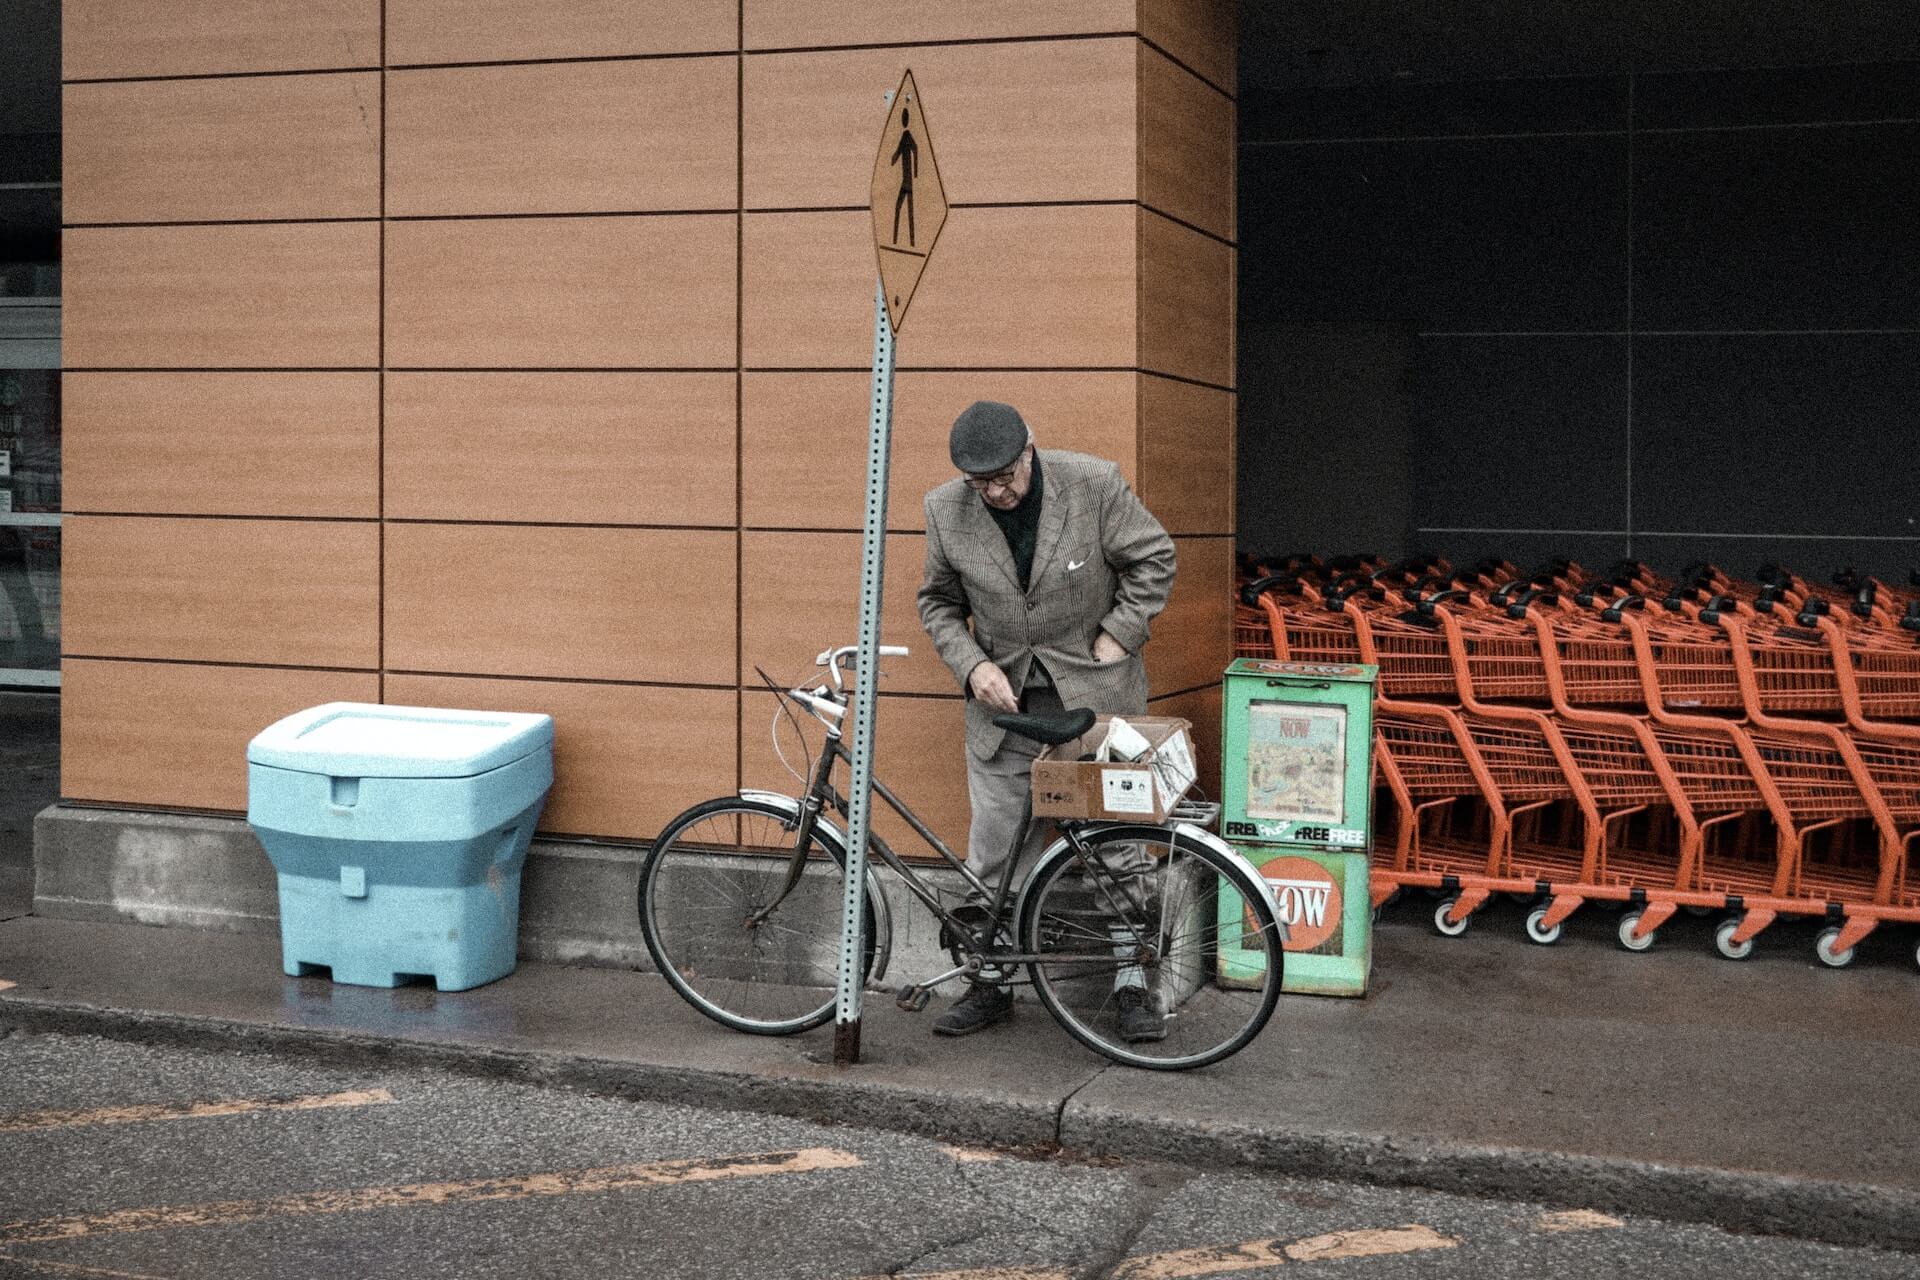 An older person parking their bicycle